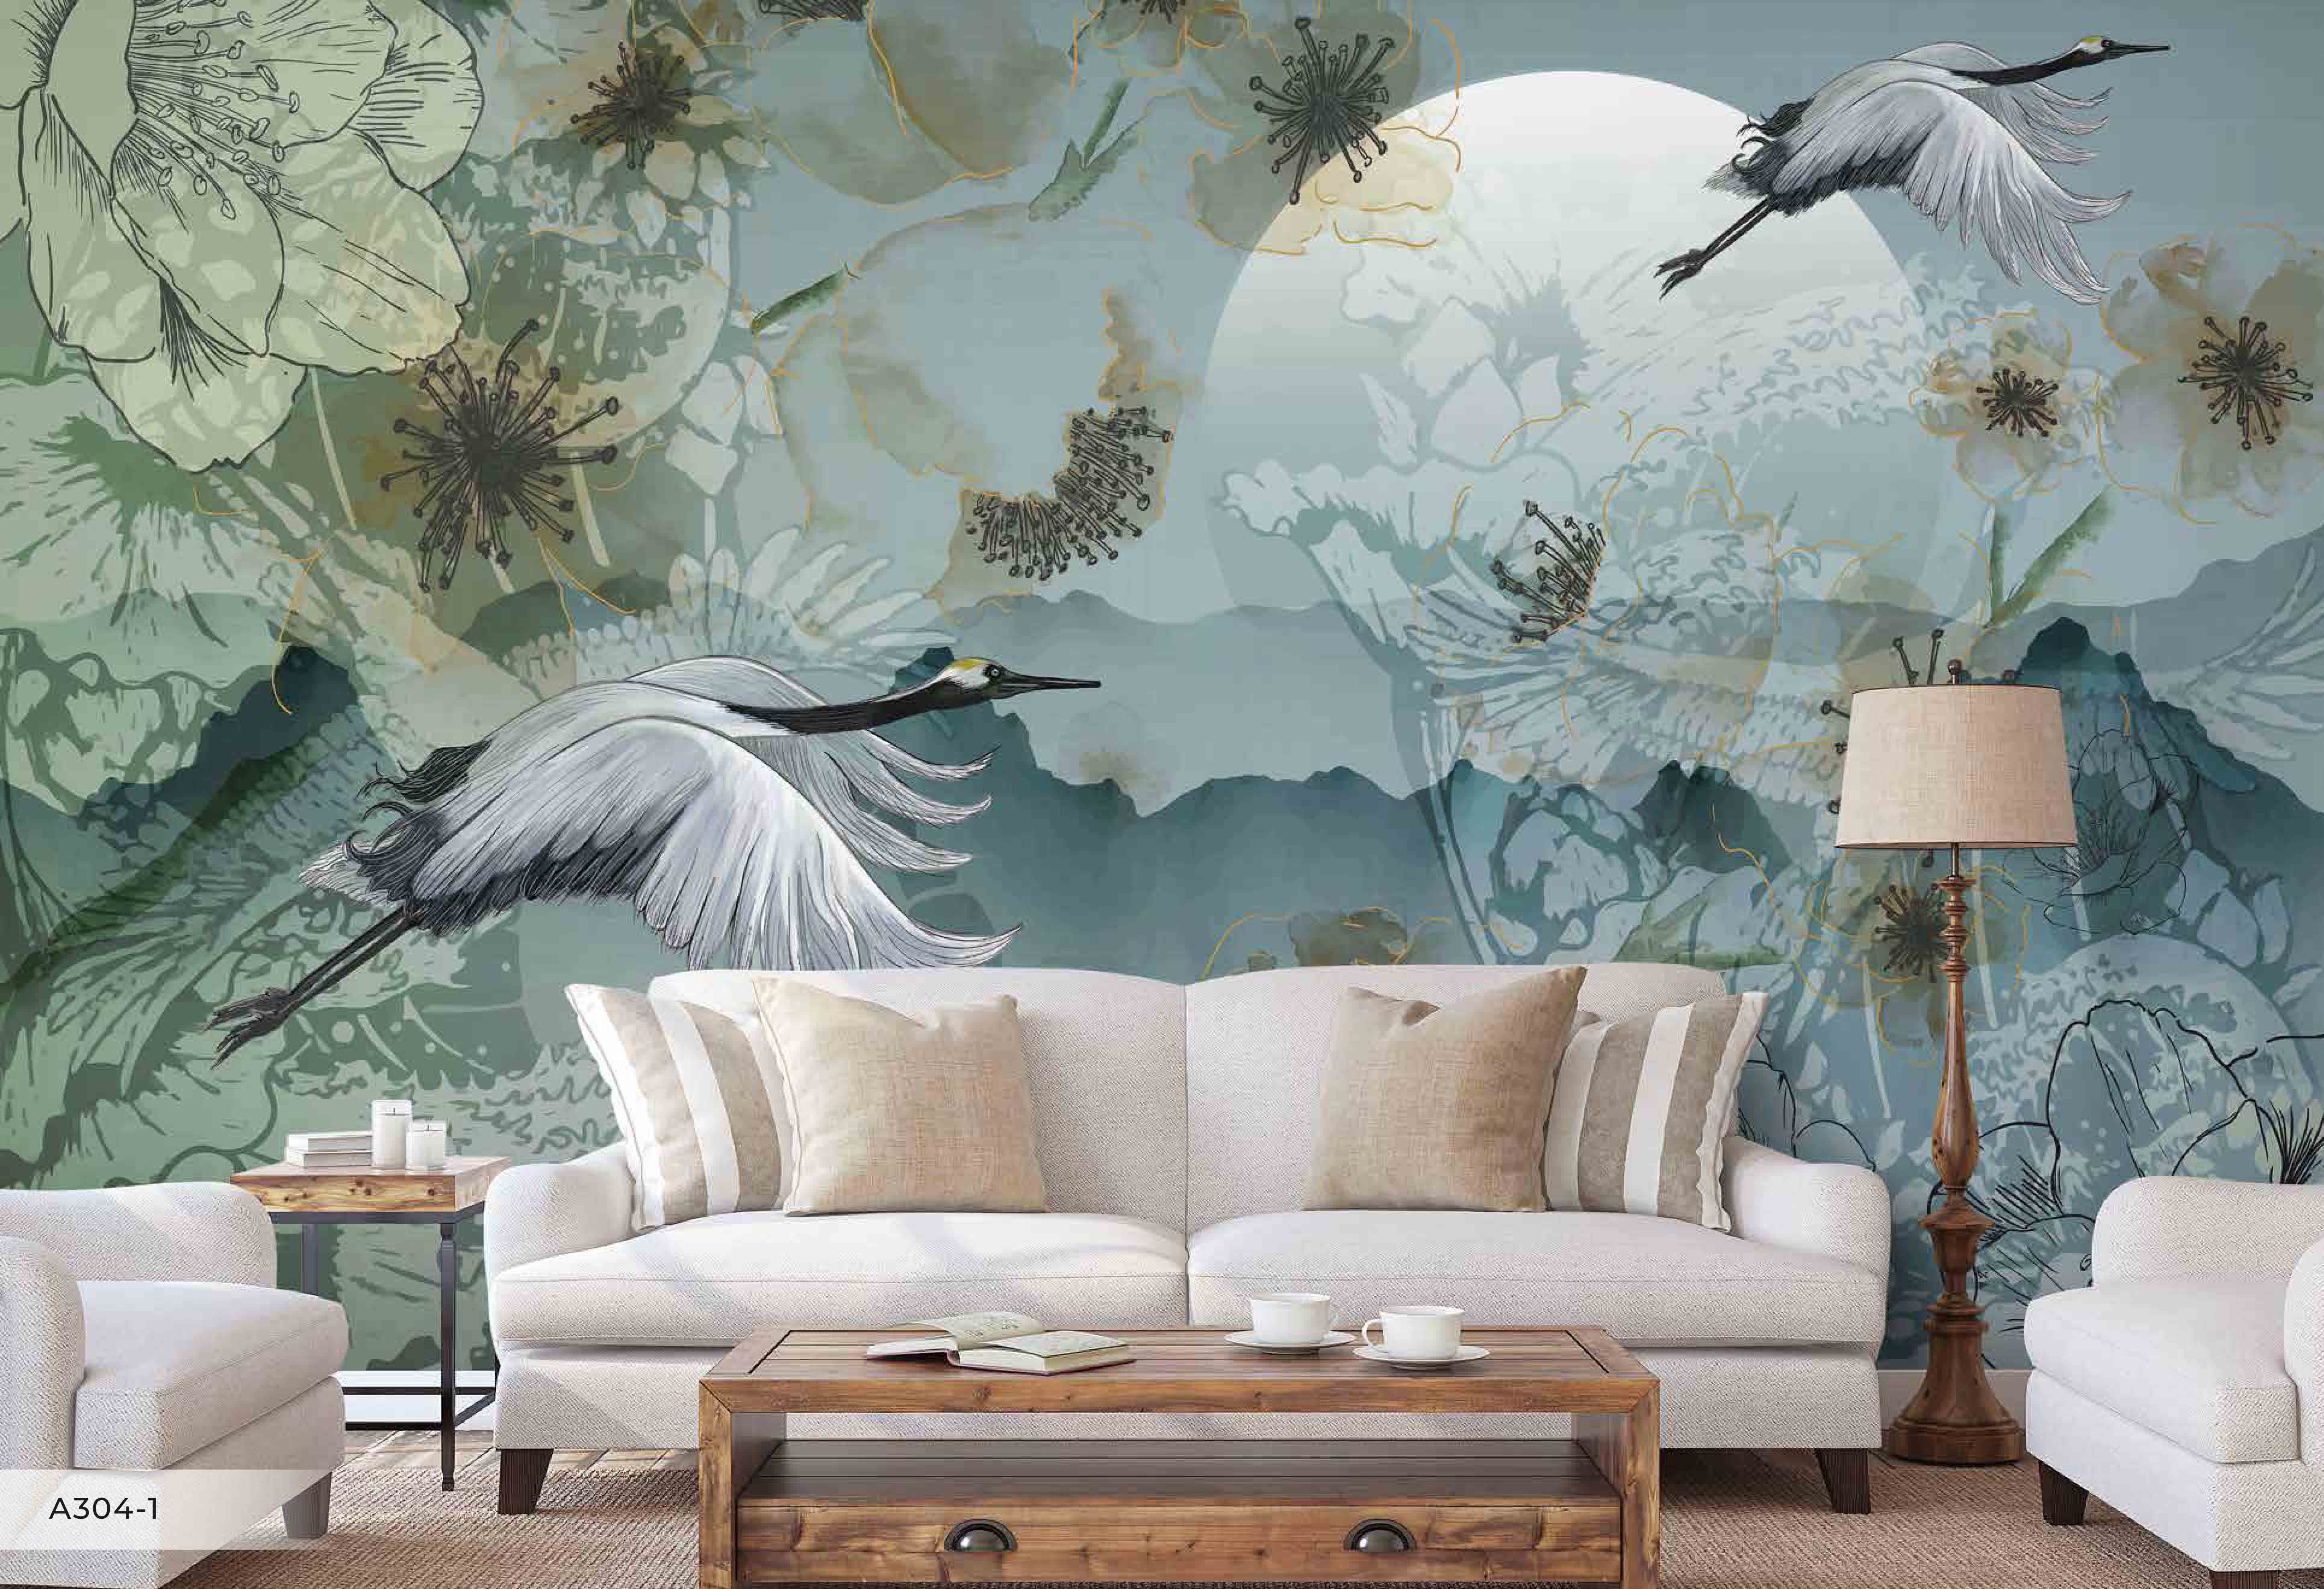 Adawall Wallpaper Manufacturer Contemporary Designs Wall Coverings